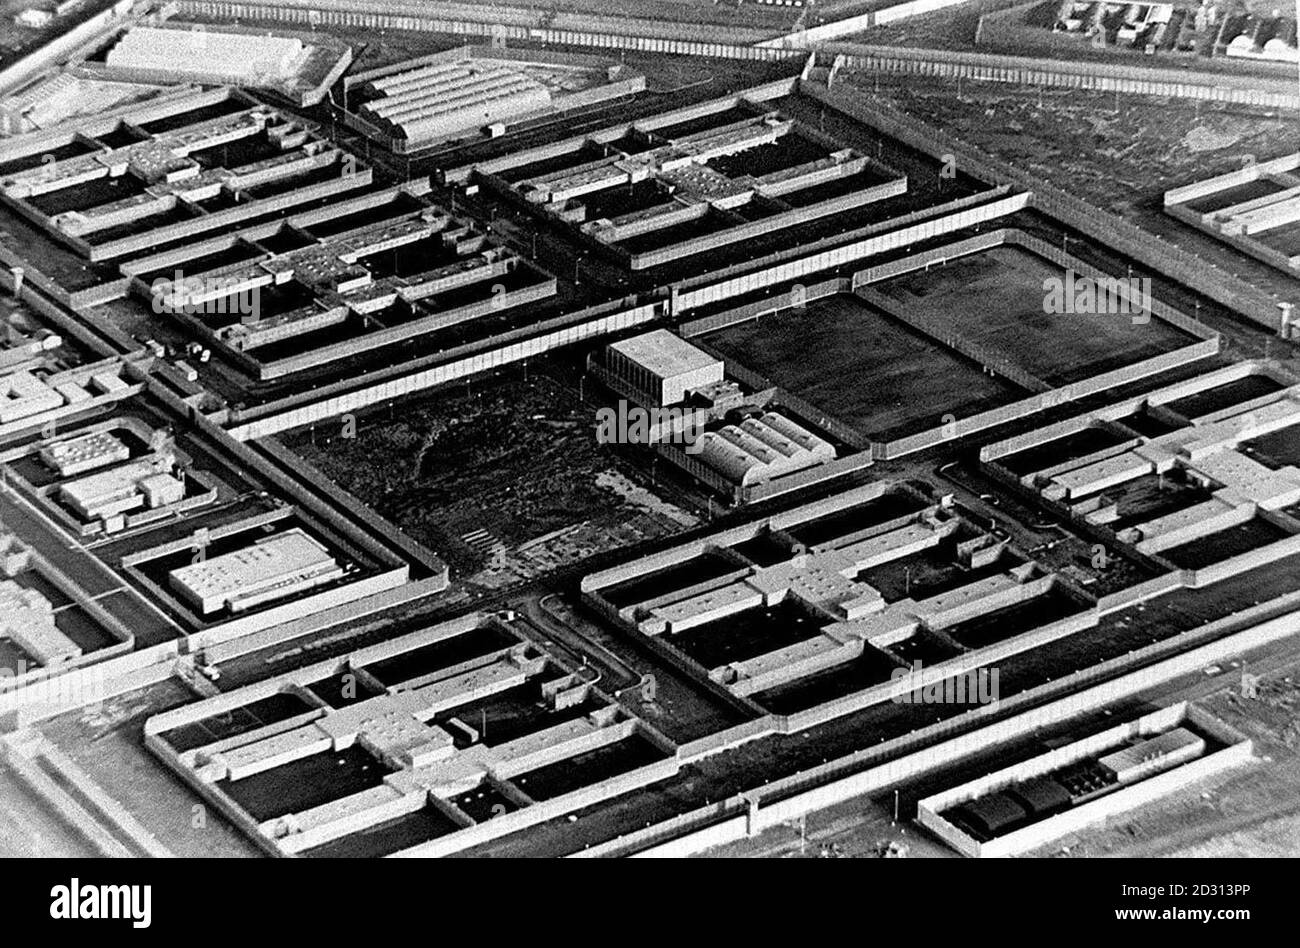 Aerial view of the Maze Prison, where 38 IRA prisoners escaped. 14/3/95: Riot. 25/8/95. 24/3/97: Breakout Bid. 27/12/97: Man shot dead. 15/03/98: David Keys found hanged in cell. 11/11/98: Will shut at end of year 2000. 28/7/00: Prisoners released.  * The London Docklands bomber and the border sniper who picked off police and troops on duty were among more than 80 terrorist prisoners set to stream out of the Maze prison. The final wave of early releases under the Good Friday Agreement was set to all but empty the infamous jail. Stock Photo